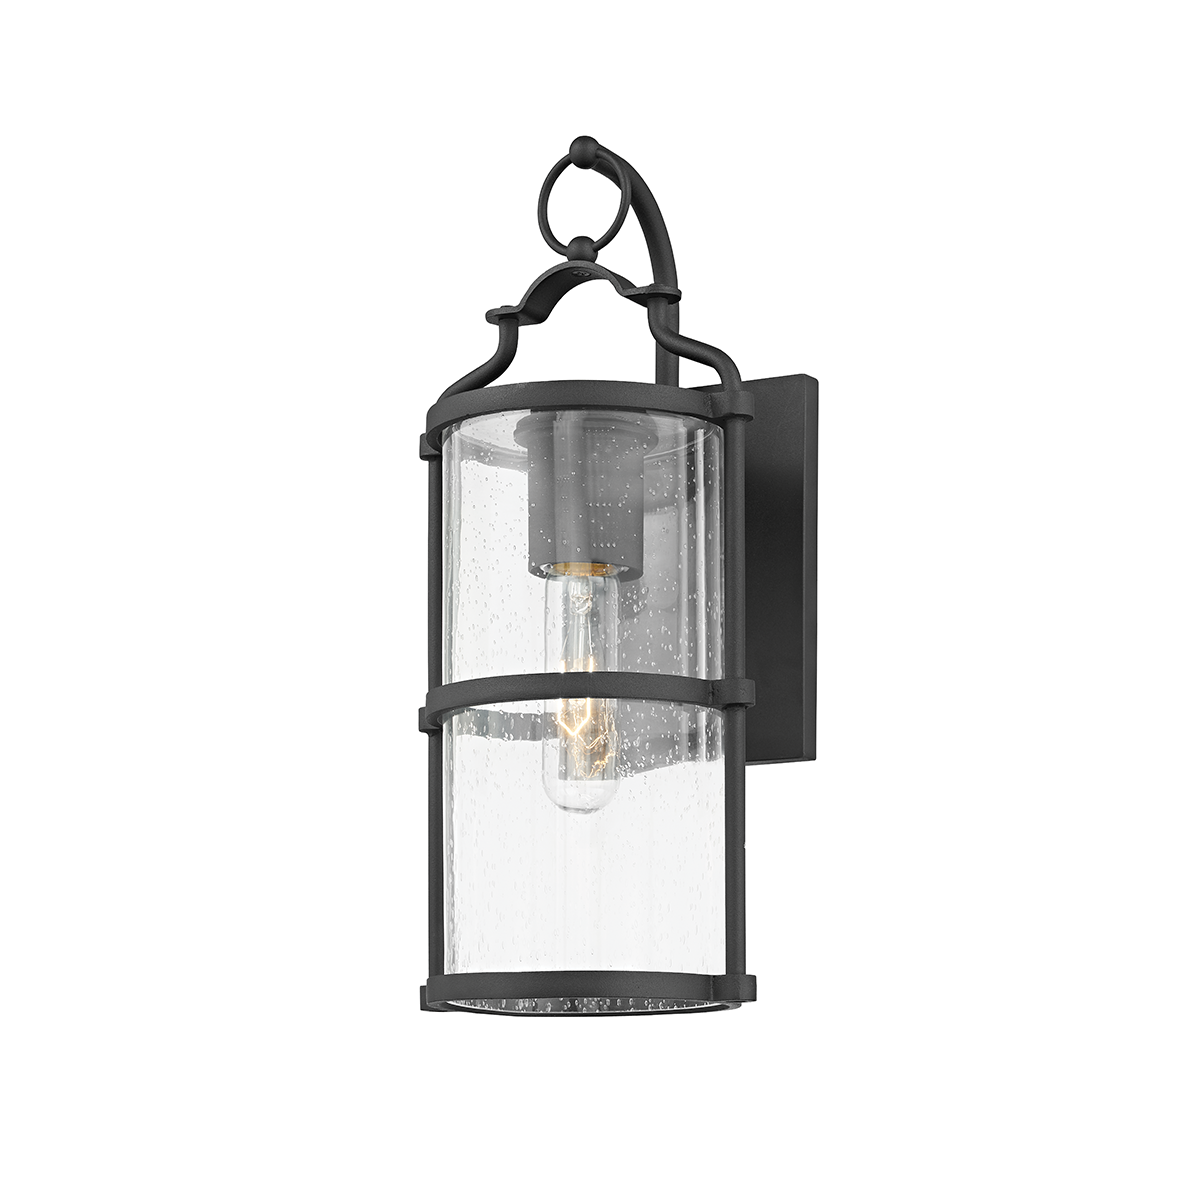 Troy Lighting 1 LIGHT SMALL EXTERIOR WALL SCONCE B1311 Outdoor l Wall Troy Lighting TEXTURE BLACK  